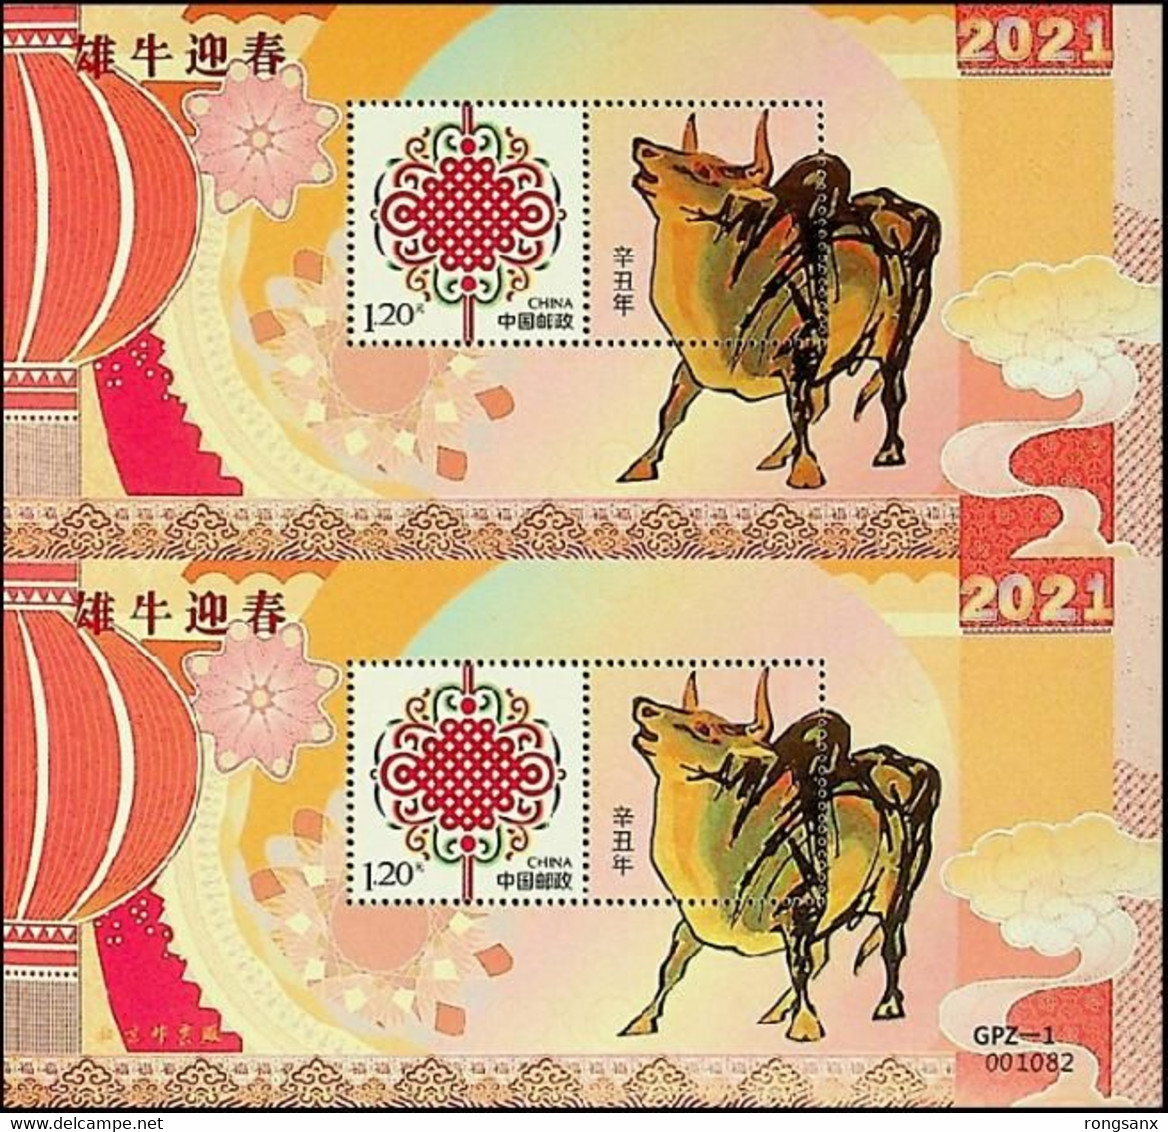 2021 CHINA YEAR OF THE BULL OX GREETING DOUBLE SHEETLET MS GPZ-1 - Anno Nuovo Cinese